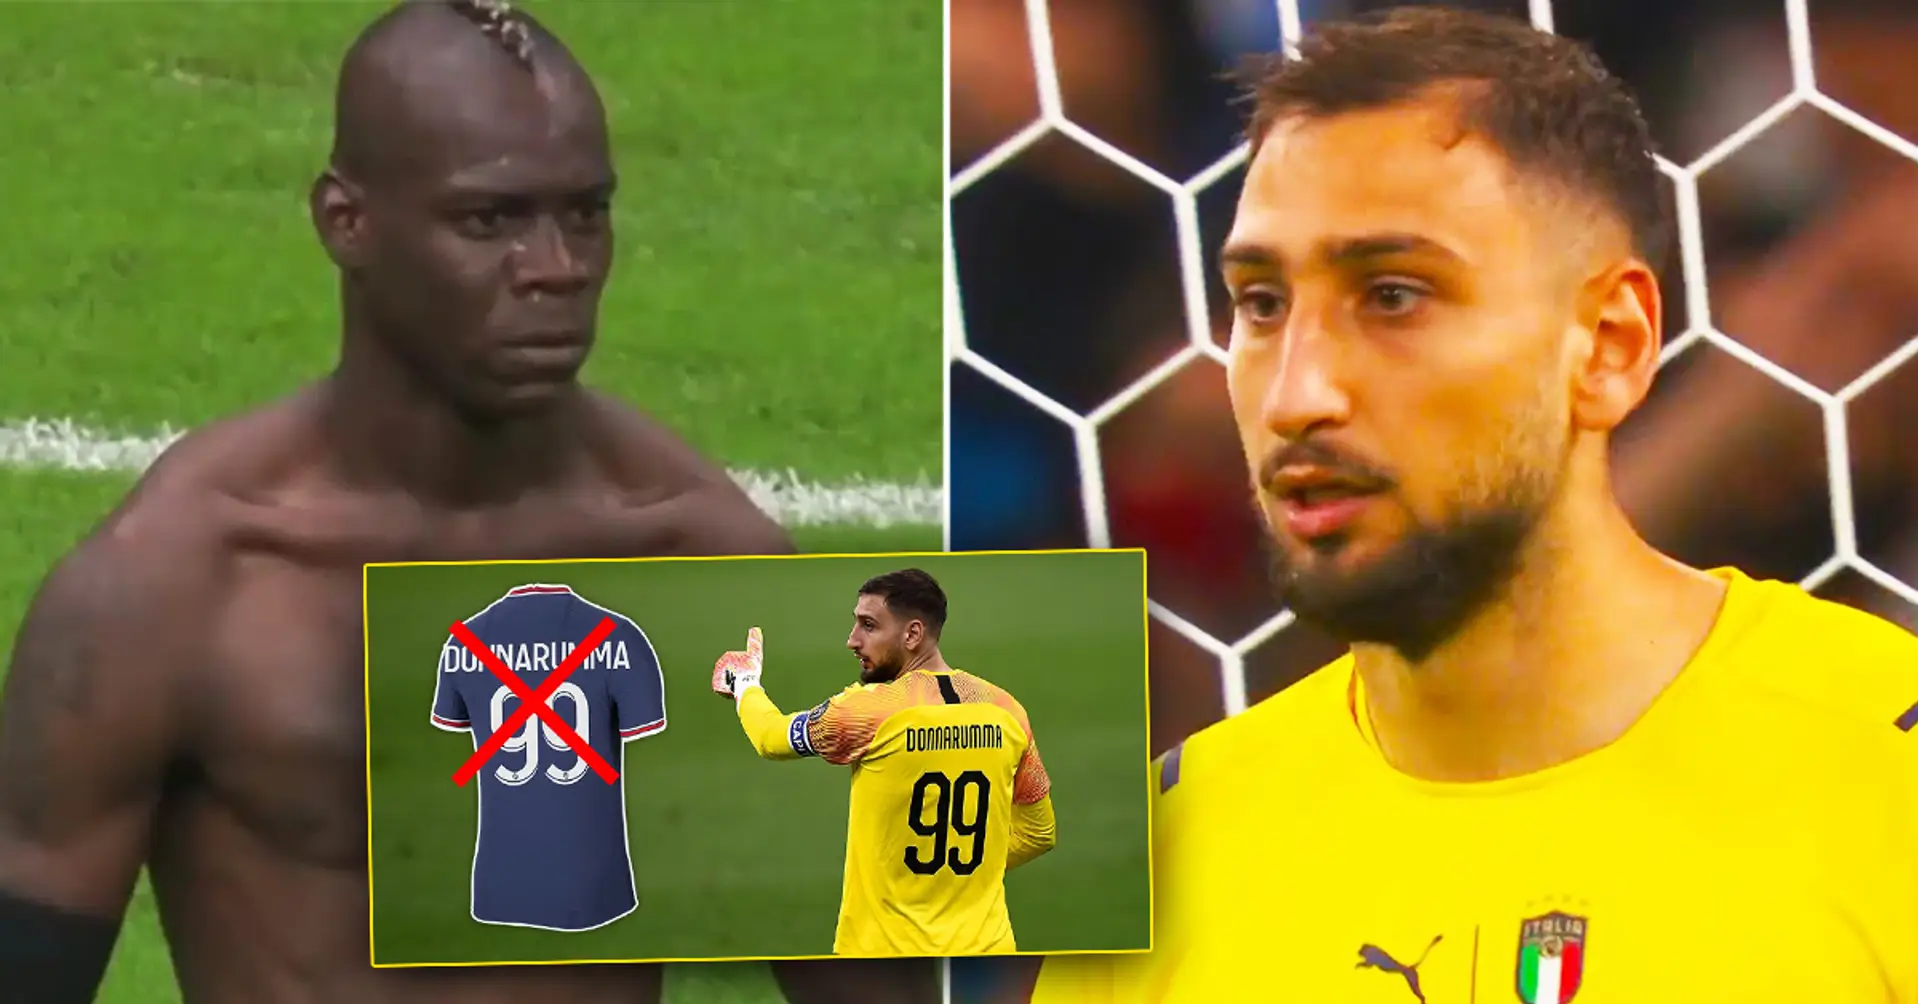 EXPLAINED: Why Donnarumma was banned from wearing his favourite No. 99 shirt at PSG